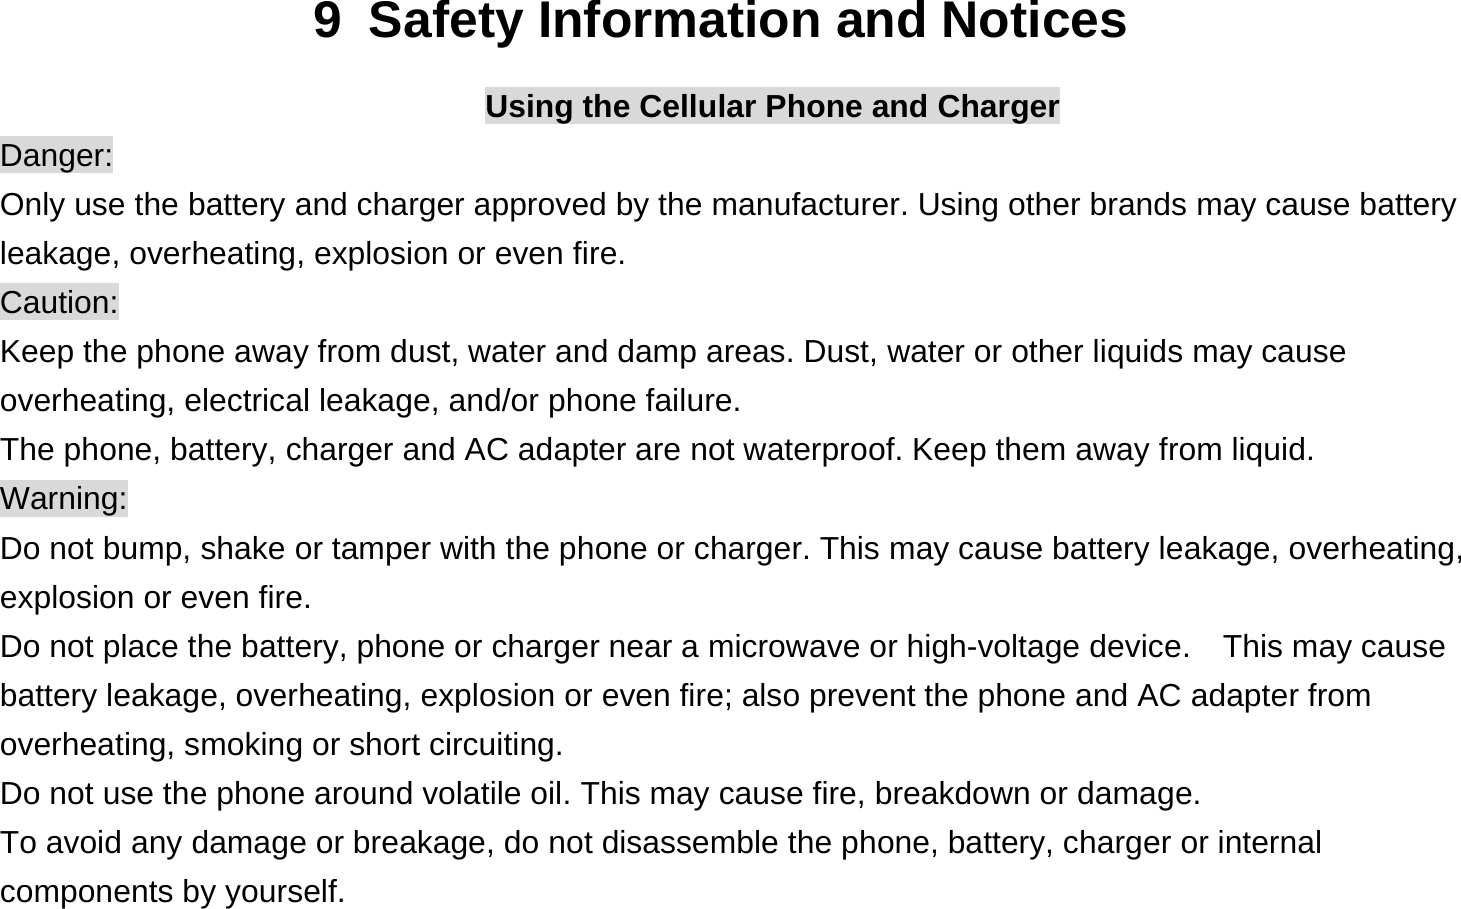 9  Safety Information and Notices Using the Cellular Phone and Charger Danger: Only use the battery and charger approved by the manufacturer. Using other brands may cause battery leakage, overheating, explosion or even fire. Caution: Keep the phone away from dust, water and damp areas. Dust, water or other liquids may cause overheating, electrical leakage, and/or phone failure.   The phone, battery, charger and AC adapter are not waterproof. Keep them away from liquid. Warning: Do not bump, shake or tamper with the phone or charger. This may cause battery leakage, overheating, explosion or even fire. Do not place the battery, phone or charger near a microwave or high-voltage device.    This may cause battery leakage, overheating, explosion or even fire; also prevent the phone and AC adapter from overheating, smoking or short circuiting. Do not use the phone around volatile oil. This may cause fire, breakdown or damage. To avoid any damage or breakage, do not disassemble the phone, battery, charger or internal components by yourself. 